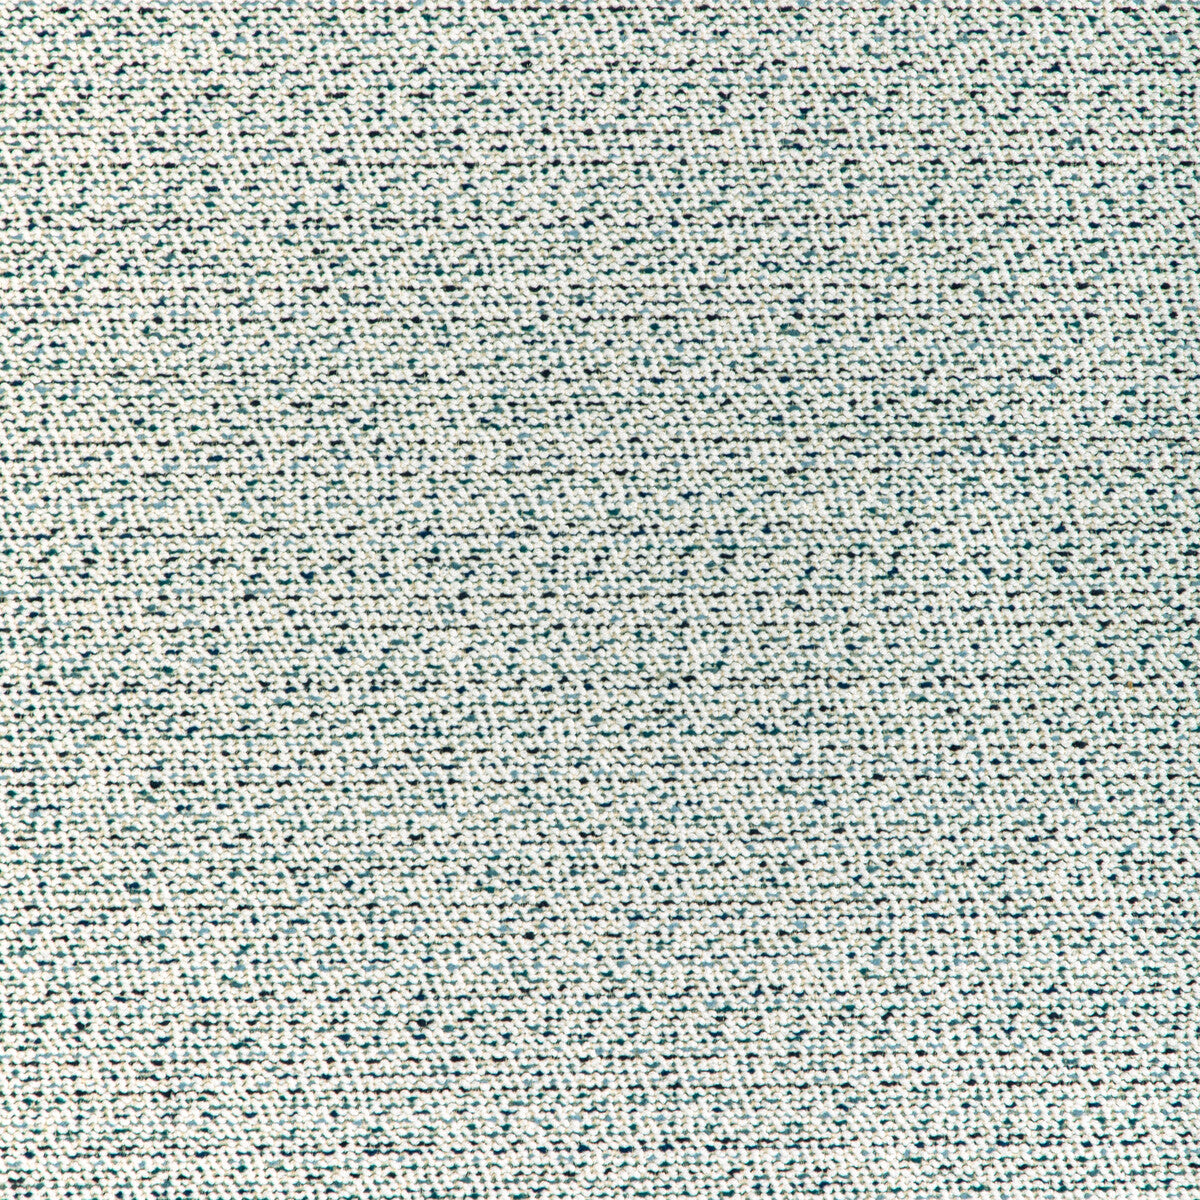 Linden fabric in indigo color - pattern 37047.5.0 - by Kravet Design in the Thom Filicia Latitude collection